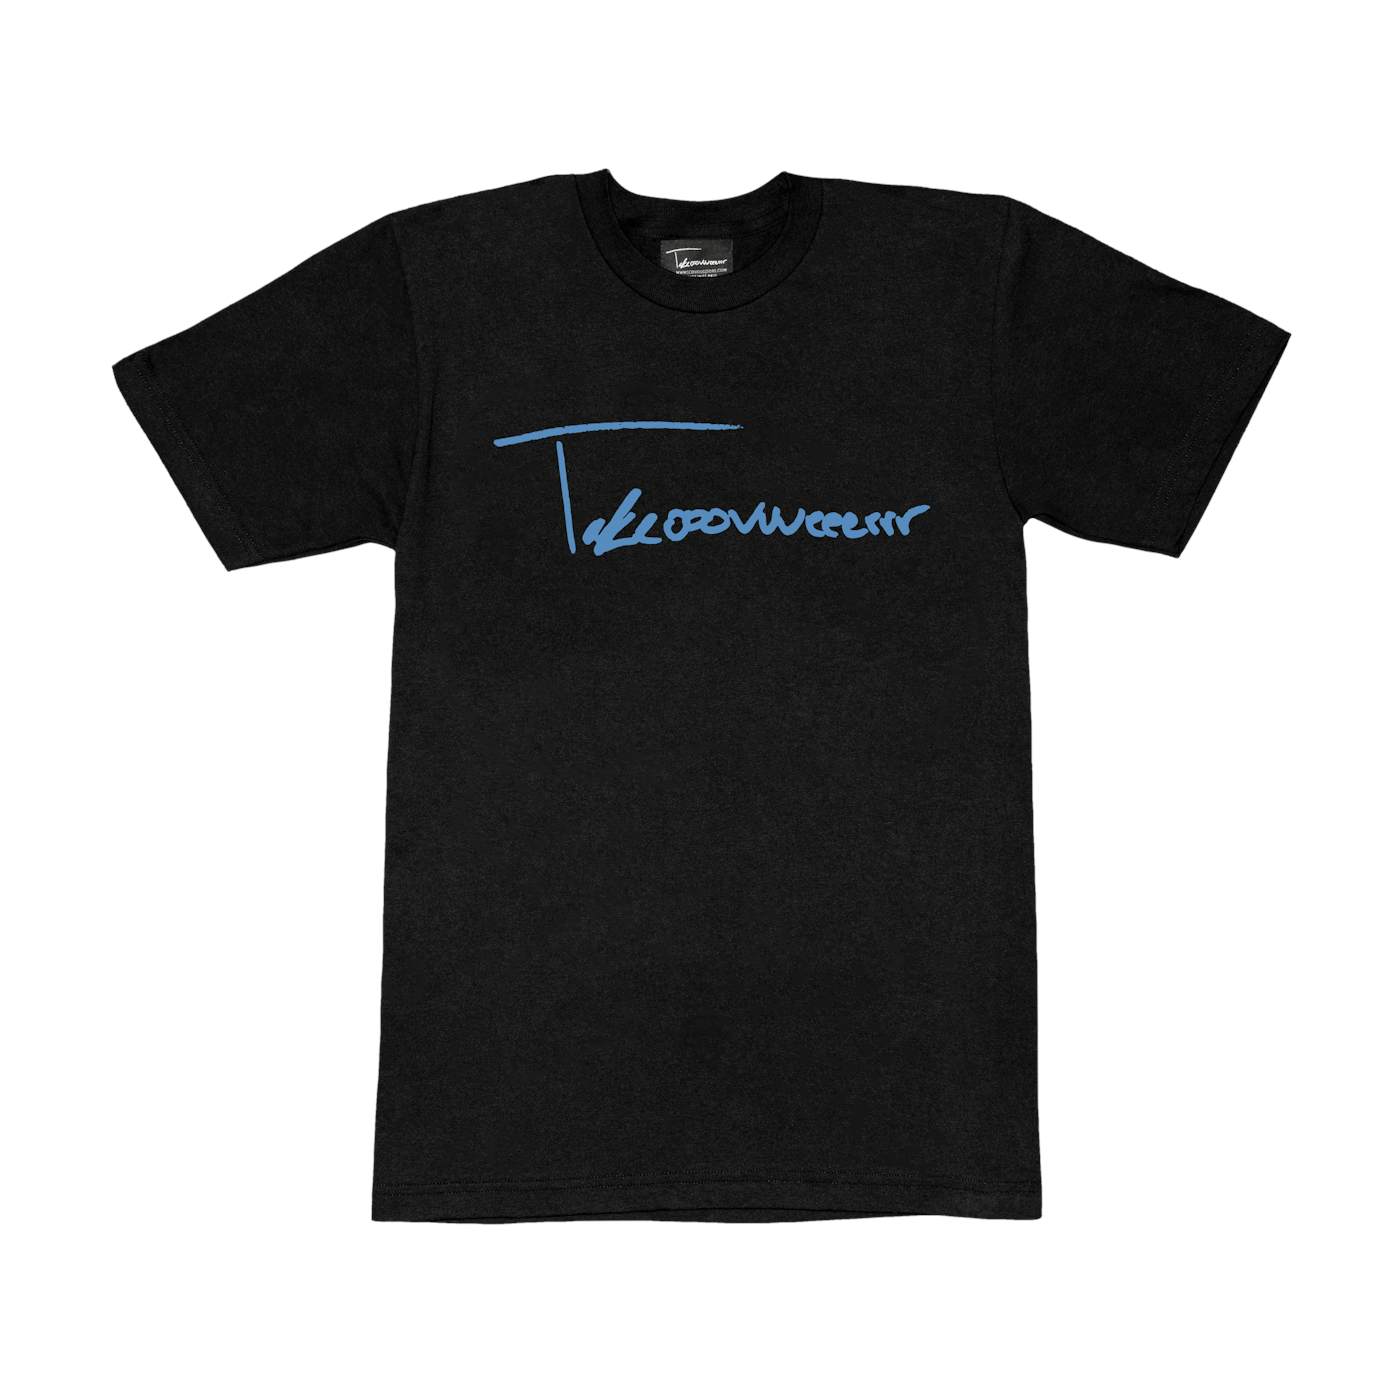 Taylor J Takeover Signature Tee (Black/Baby Blue)